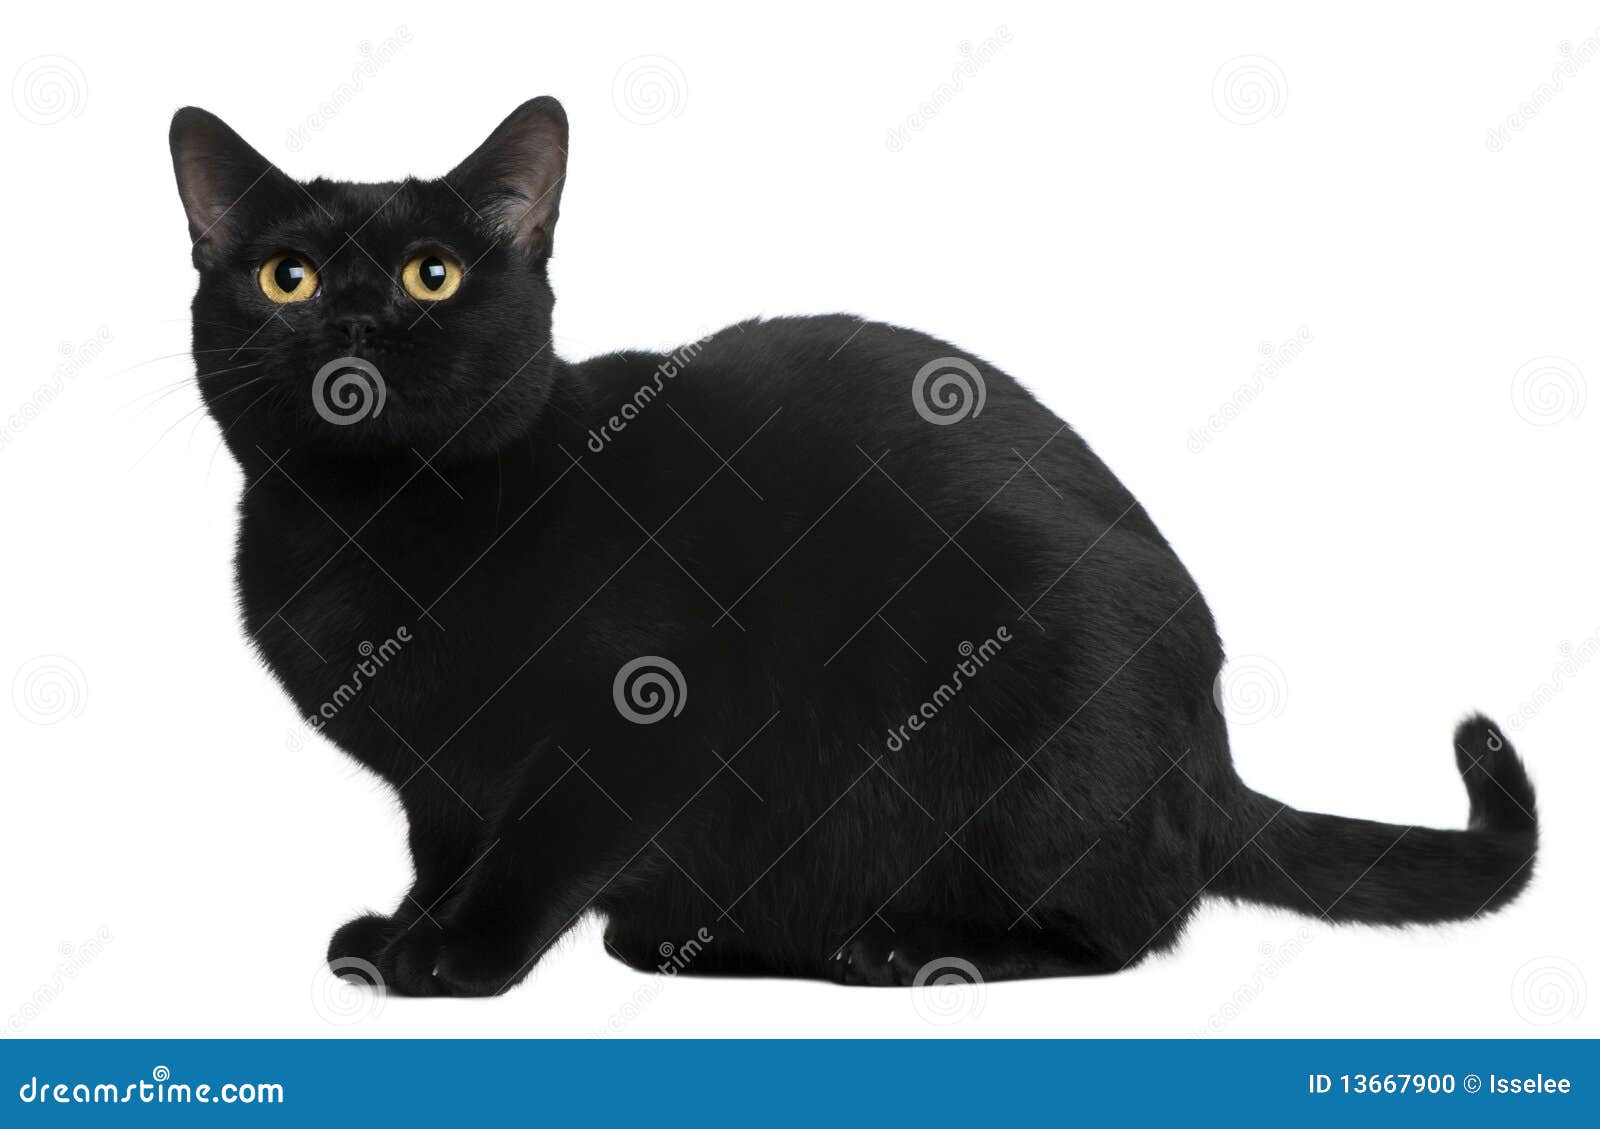 bombay cat, 8 months old